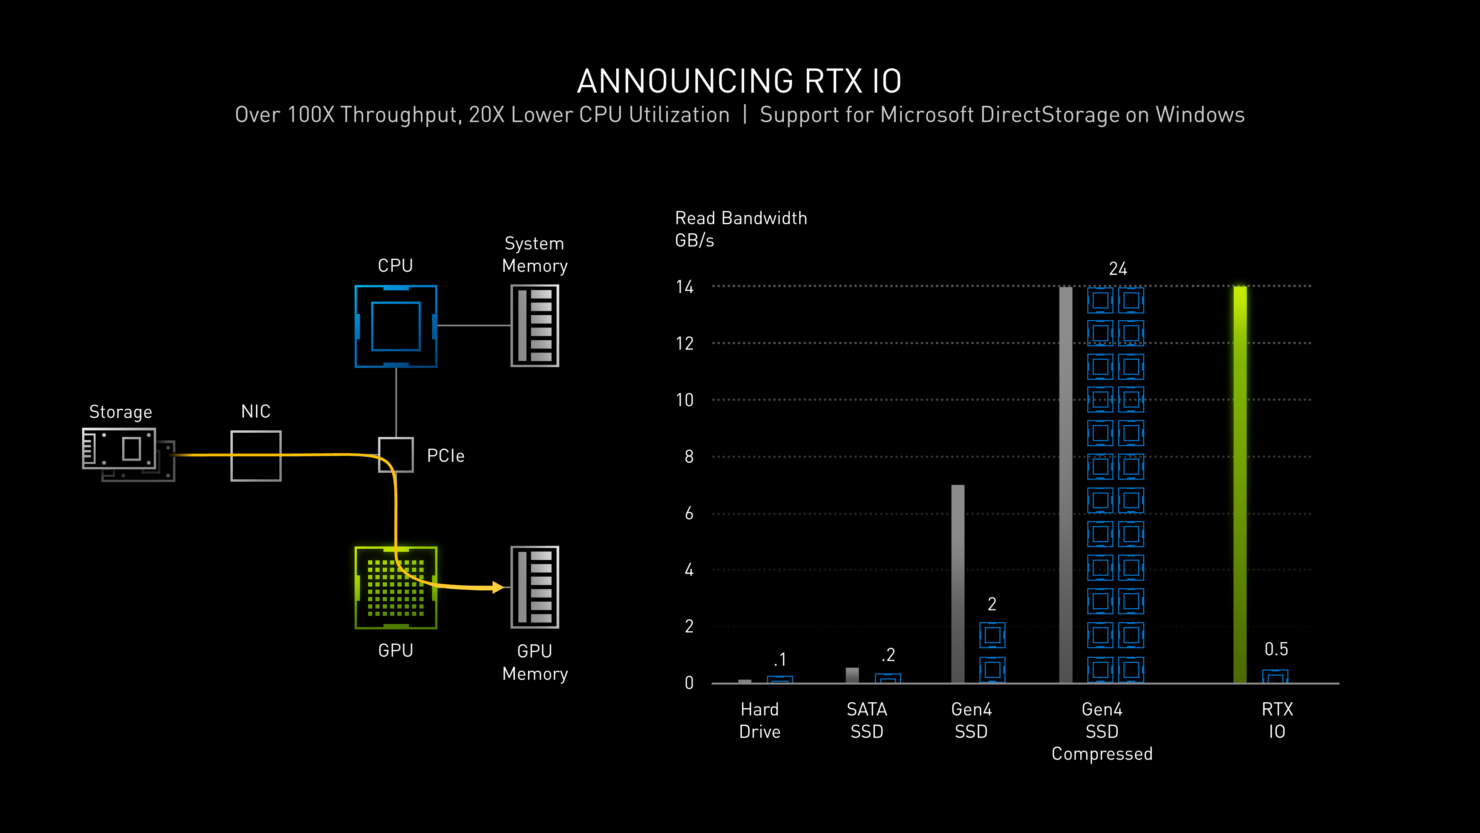 nvidia-geforce-rtx-30-series-graphics-cards_announcement_geforce-rtx-3090_rtx-3080_rtx-3070_7-1480x833-7202340